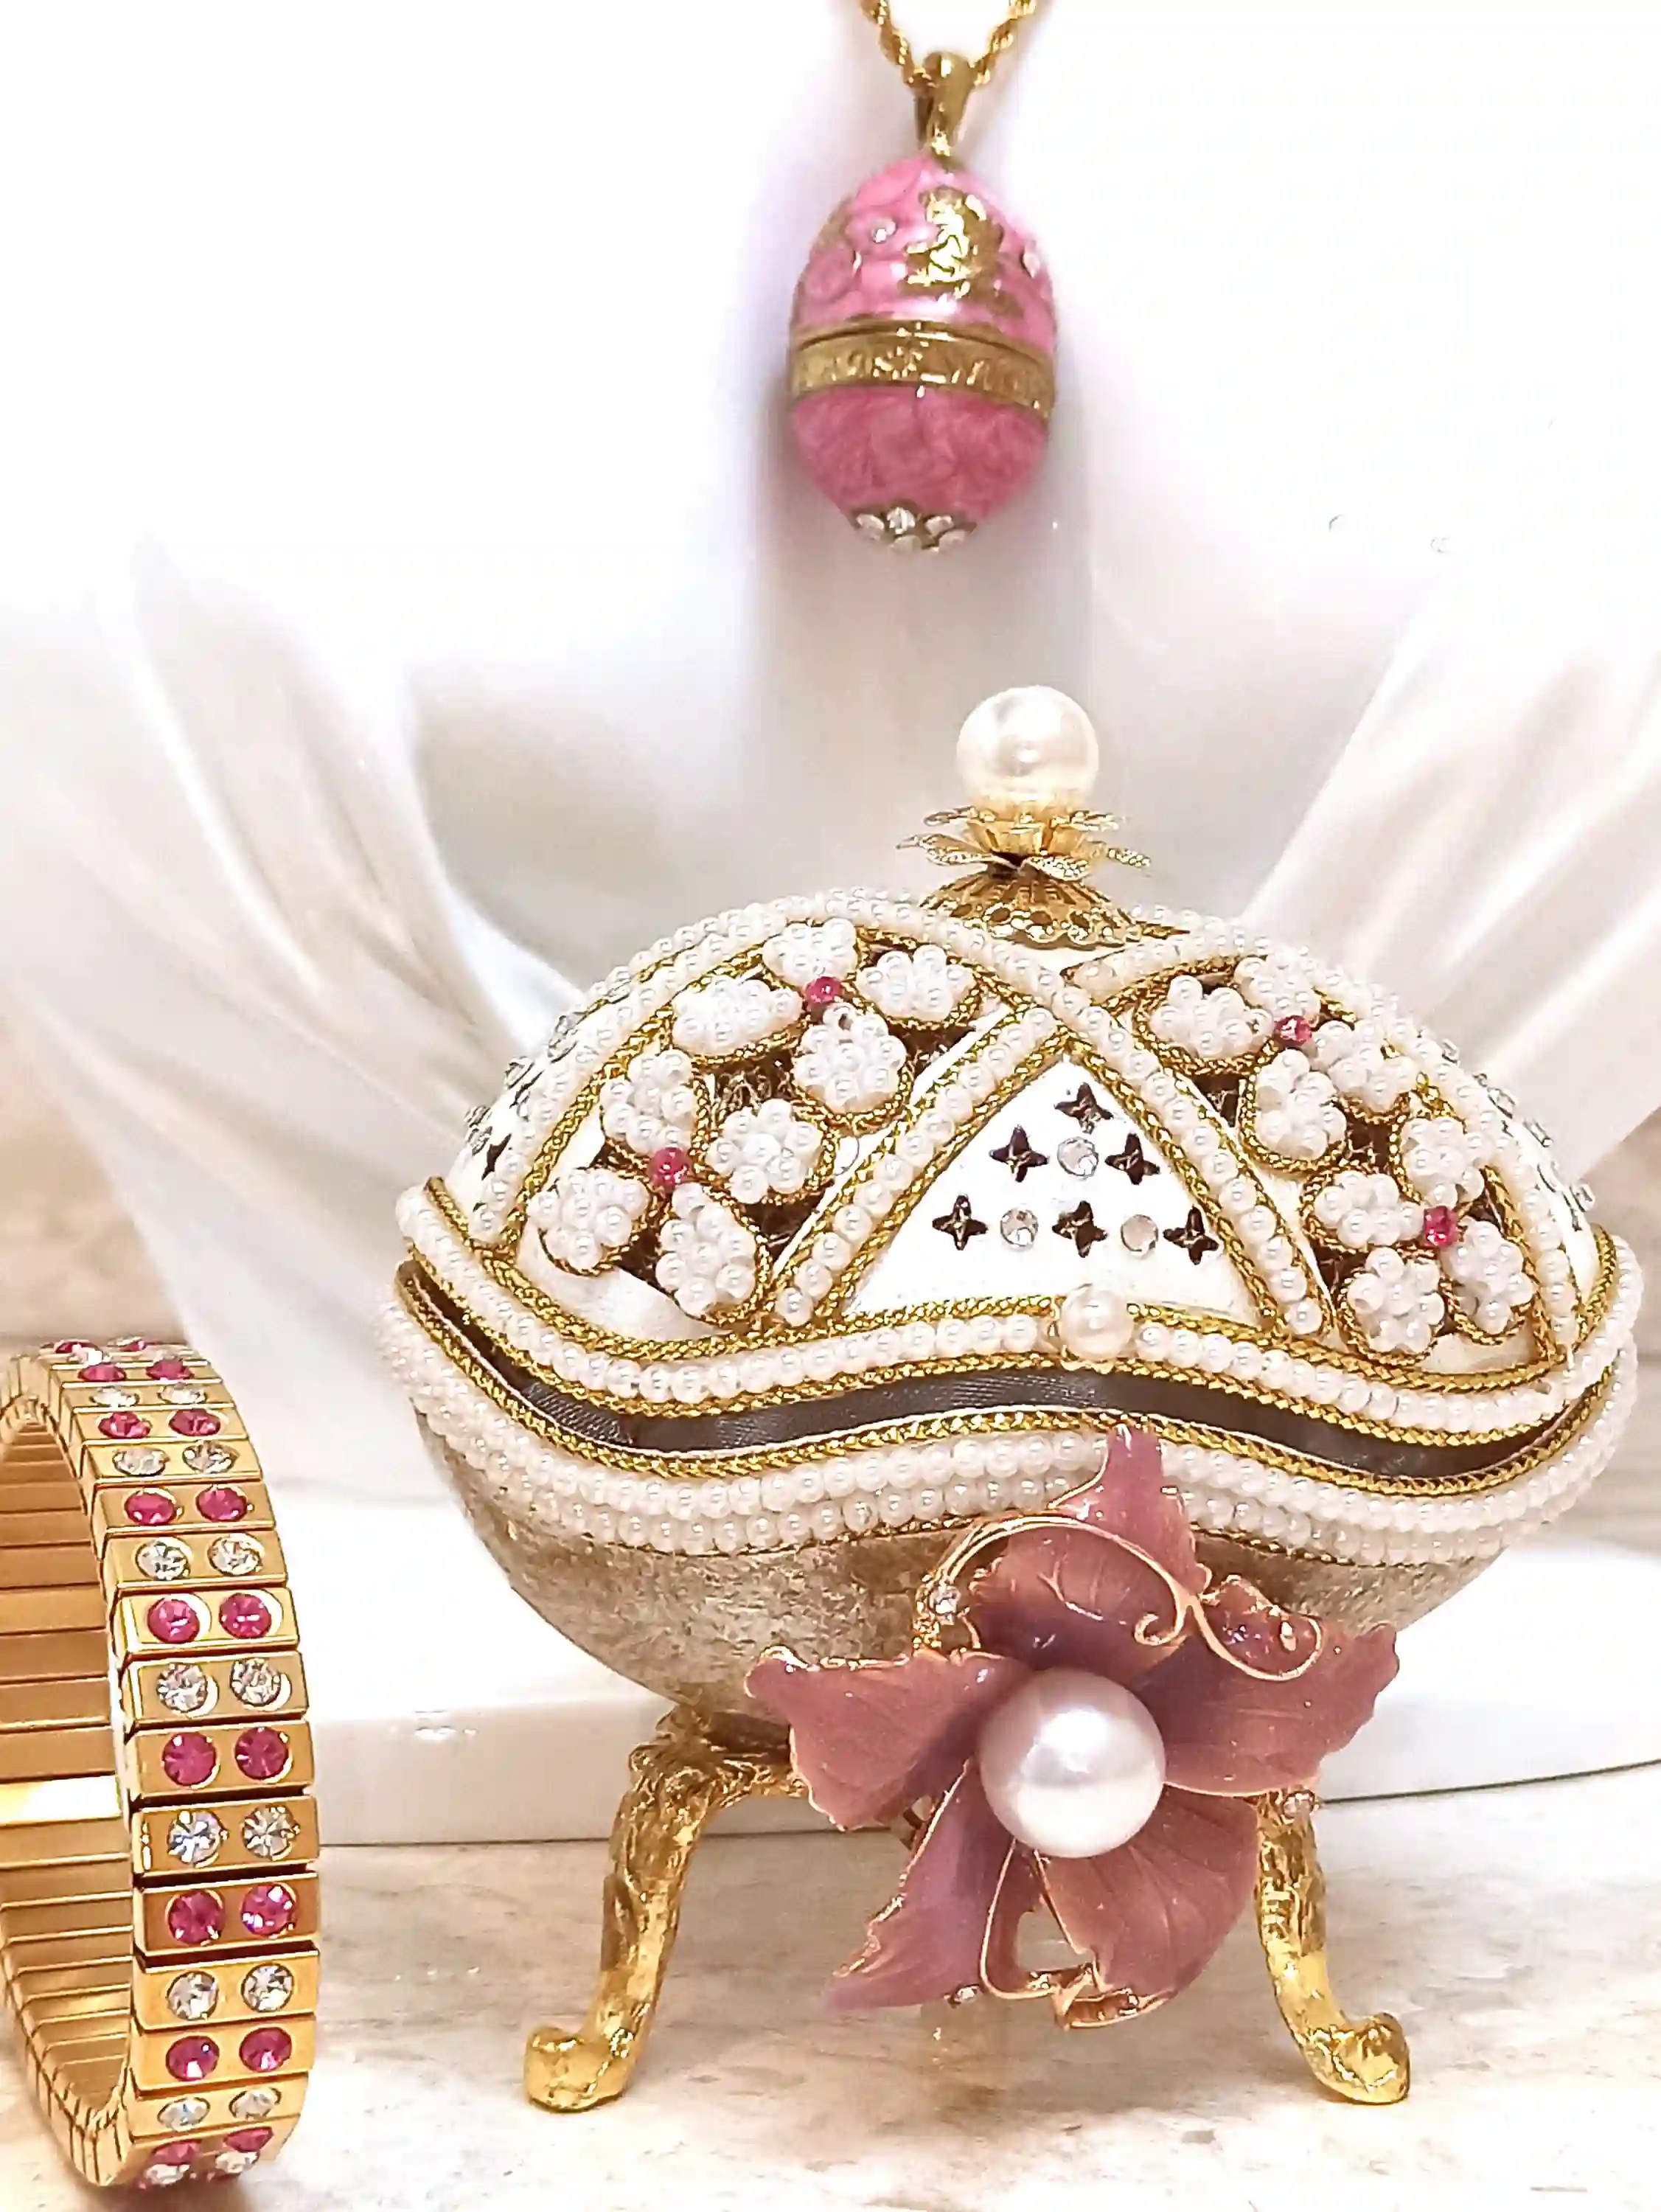 UNIQUE Pink Pearl Jewelry Faberge style egg, New Mom Gift Box,24k GOLD,Trinket Box ,Russian Music Box - Faberge Egg Necklace - 2ct Bracelet 